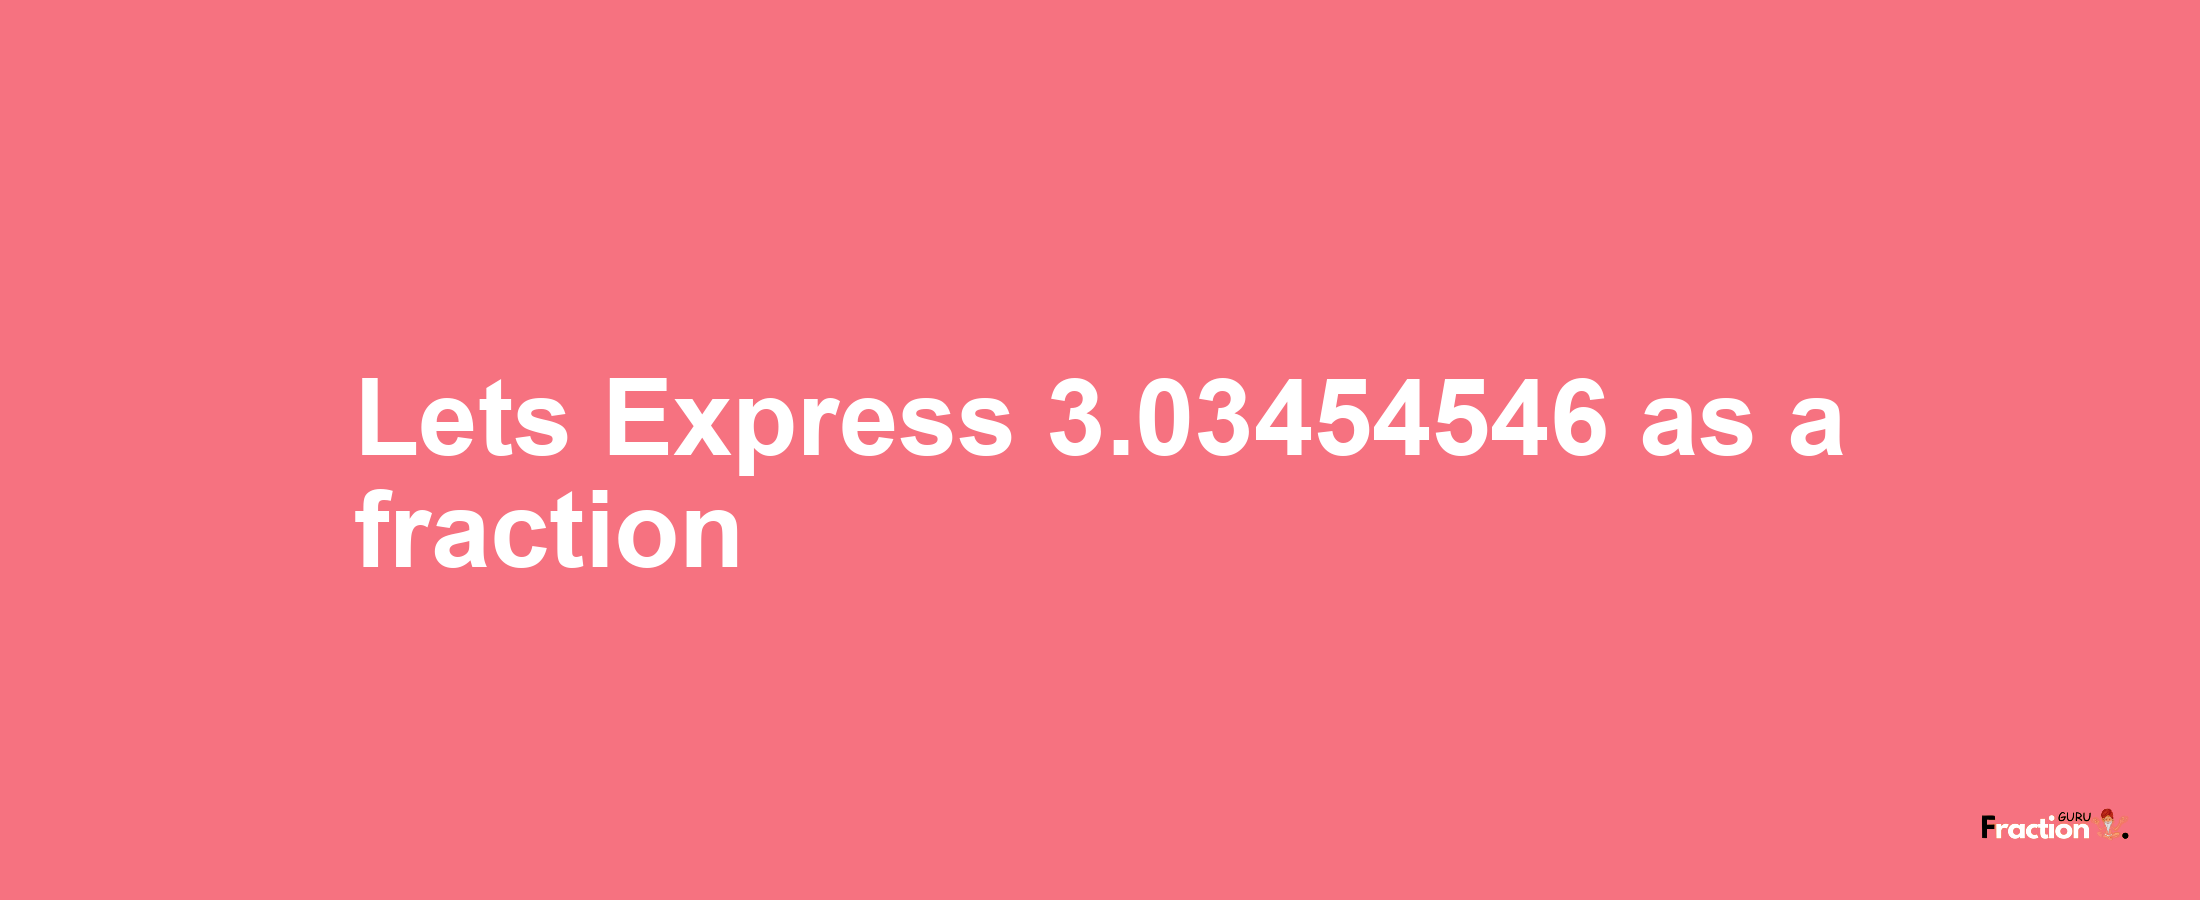 Lets Express 3.03454546 as afraction